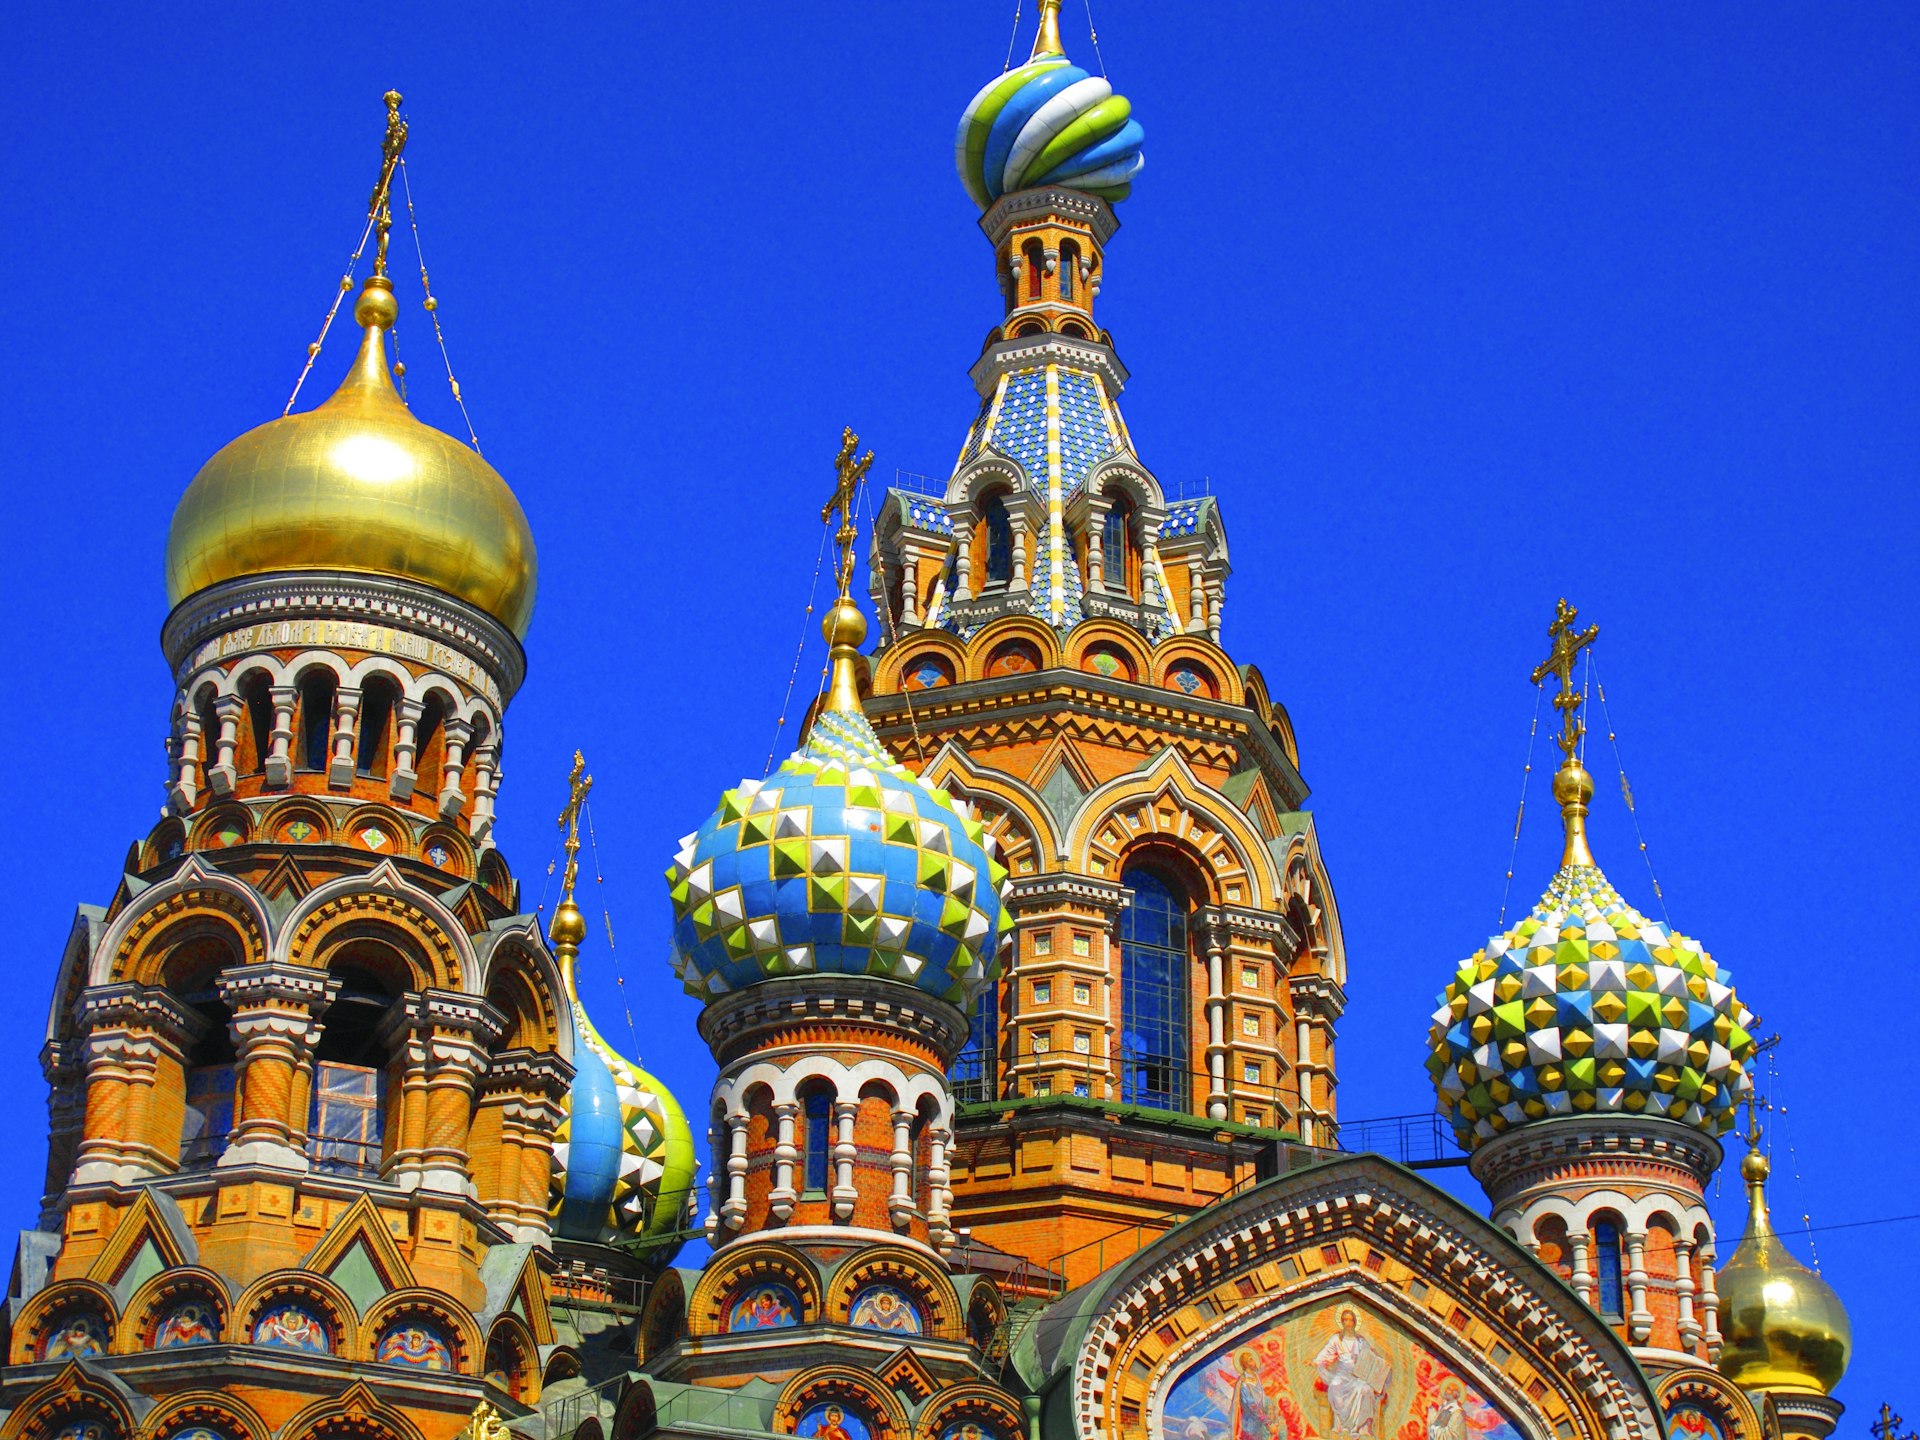 The domes of a colorful Russian Orthodox church against a blue sky